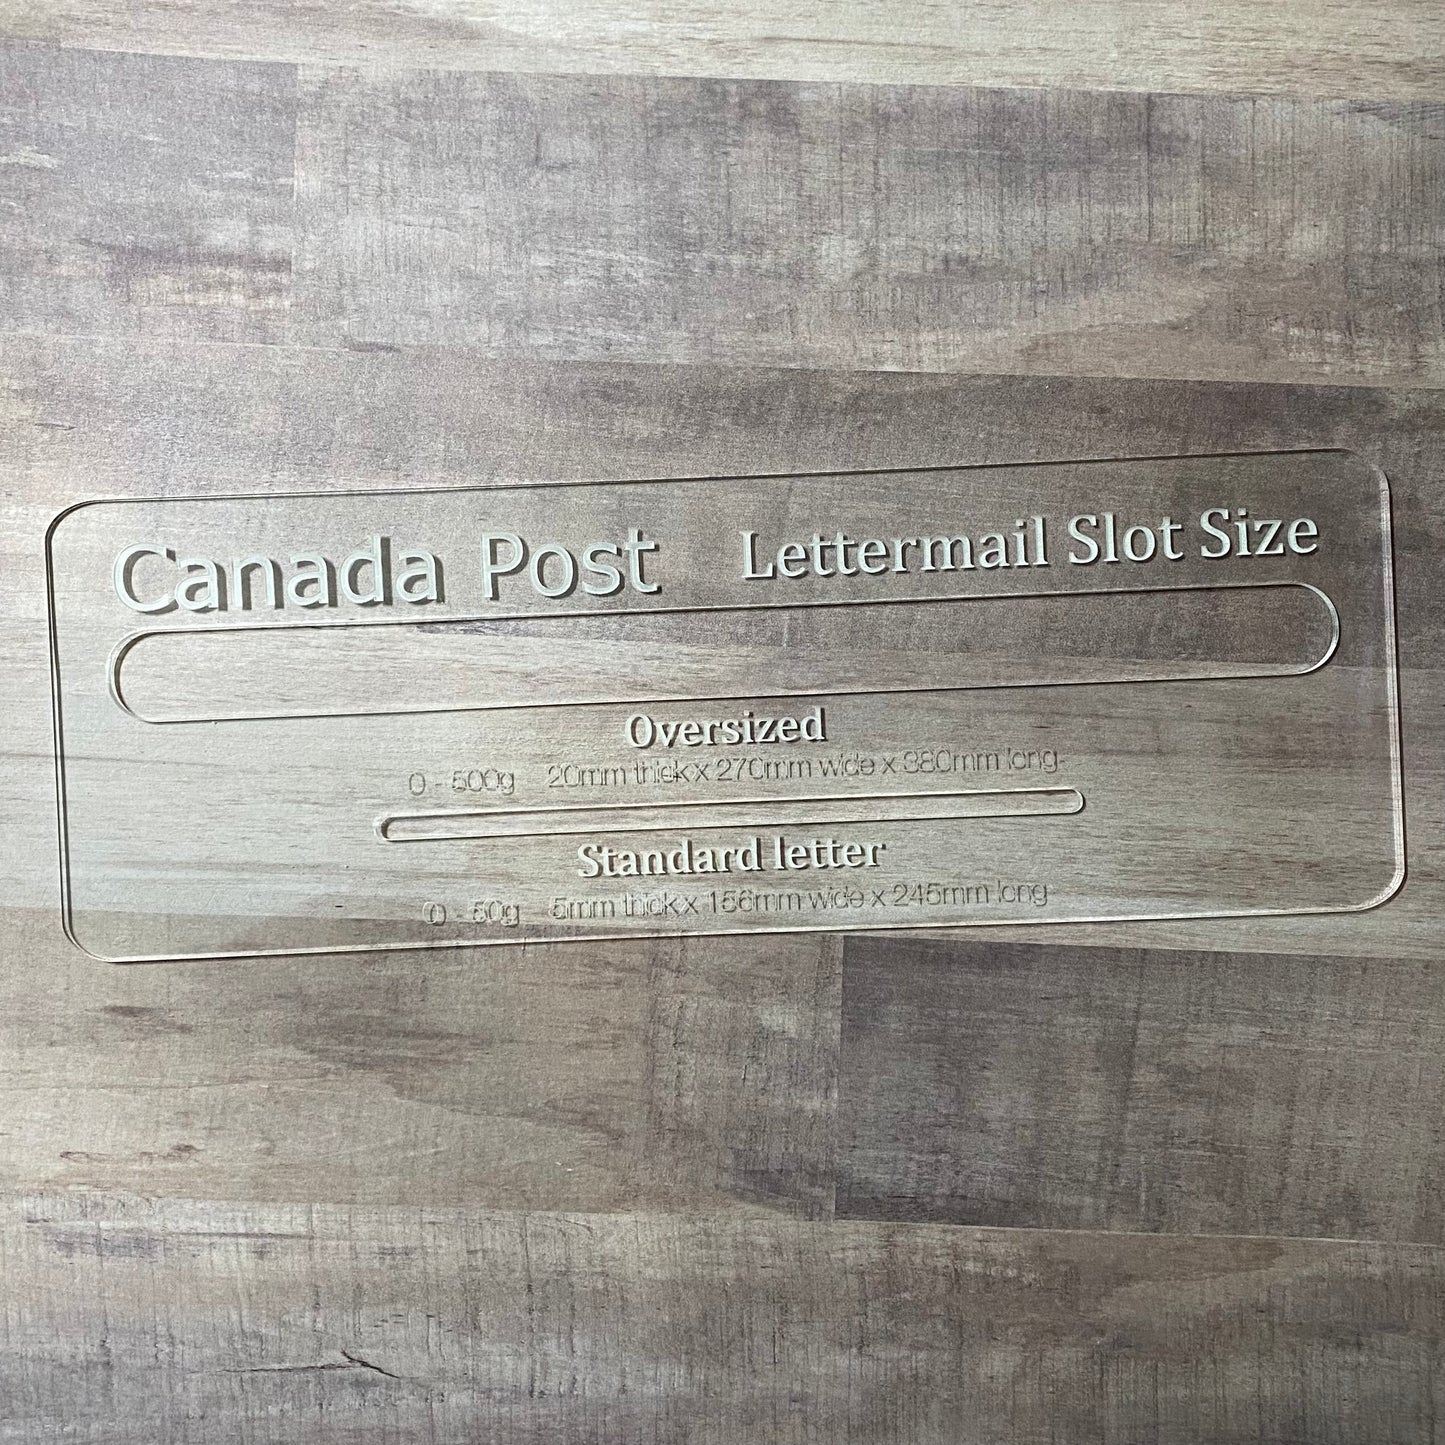 Canada Post Lettermail Tool